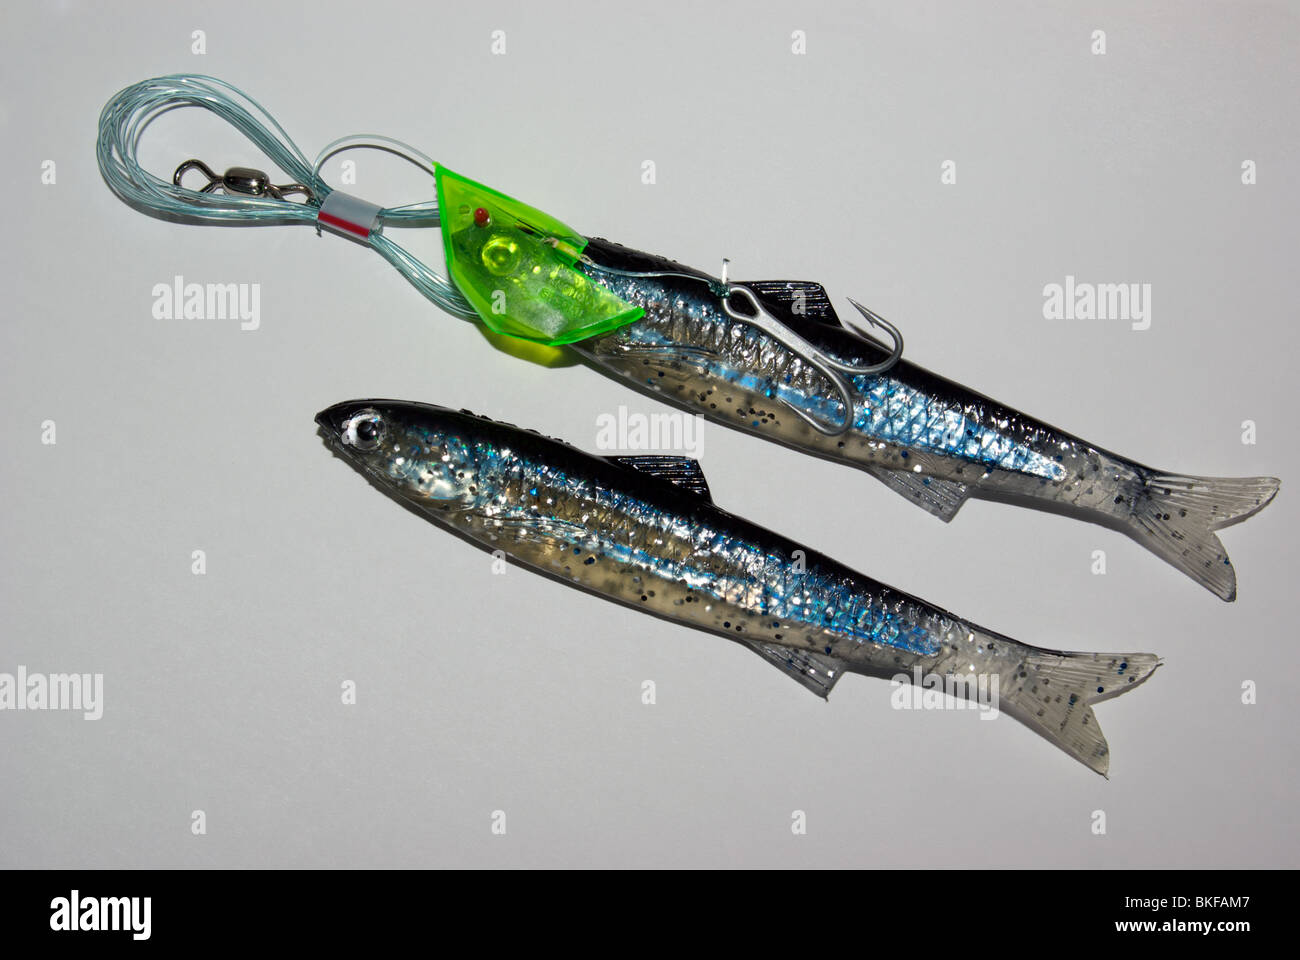 Baitrix tunable soft plastic imitation anchovy lures in Rhys David Anchovy Special teaser head for salmon fishing Stock Photo